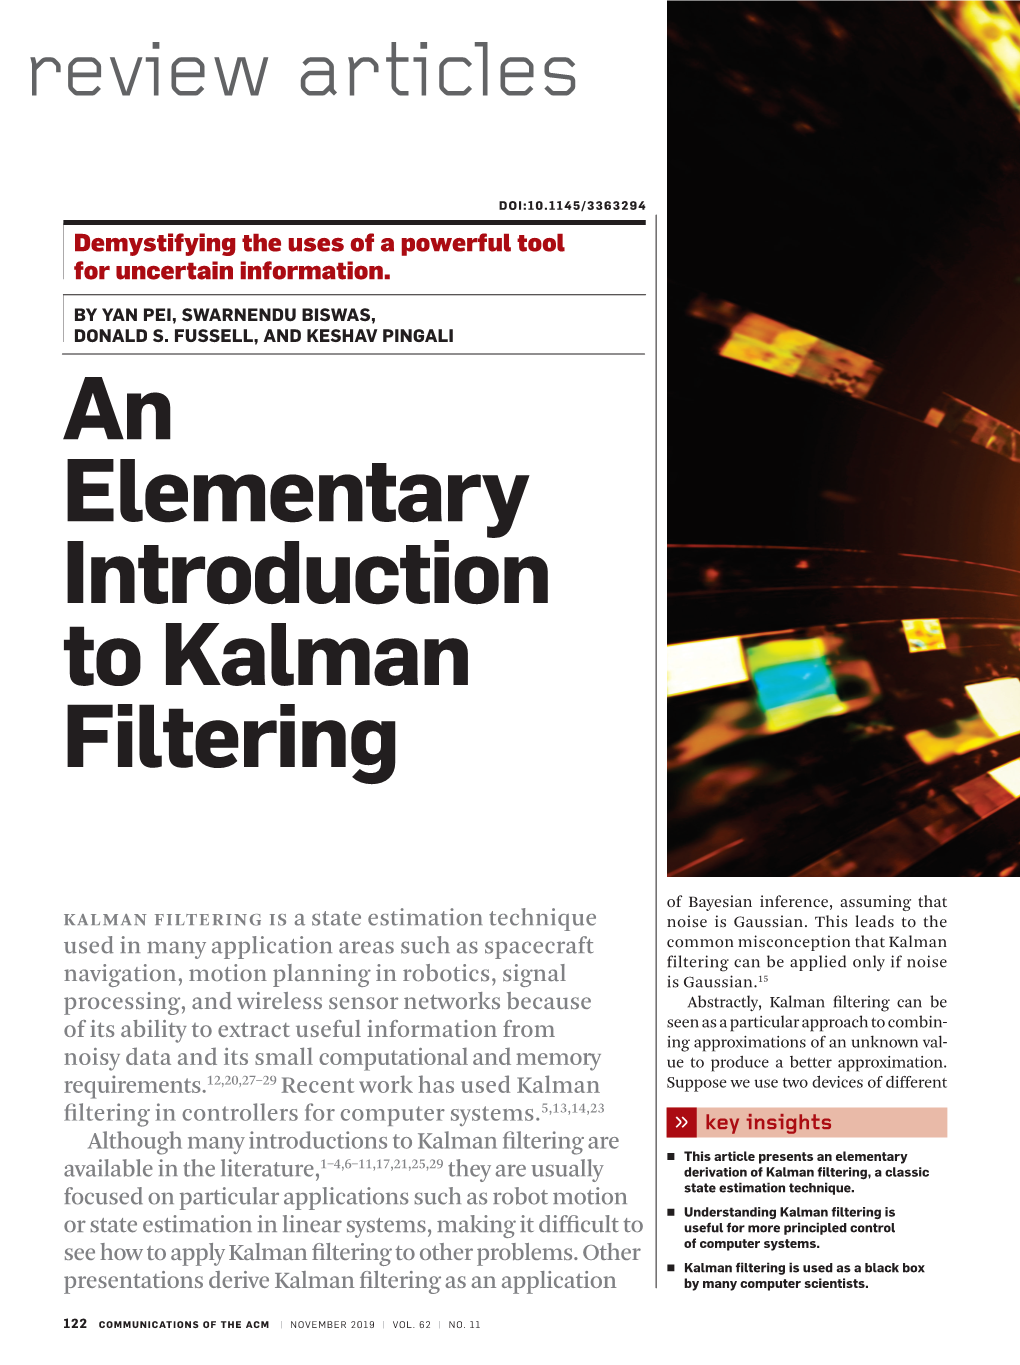 An Elementary Introduction to Kalman Filtering